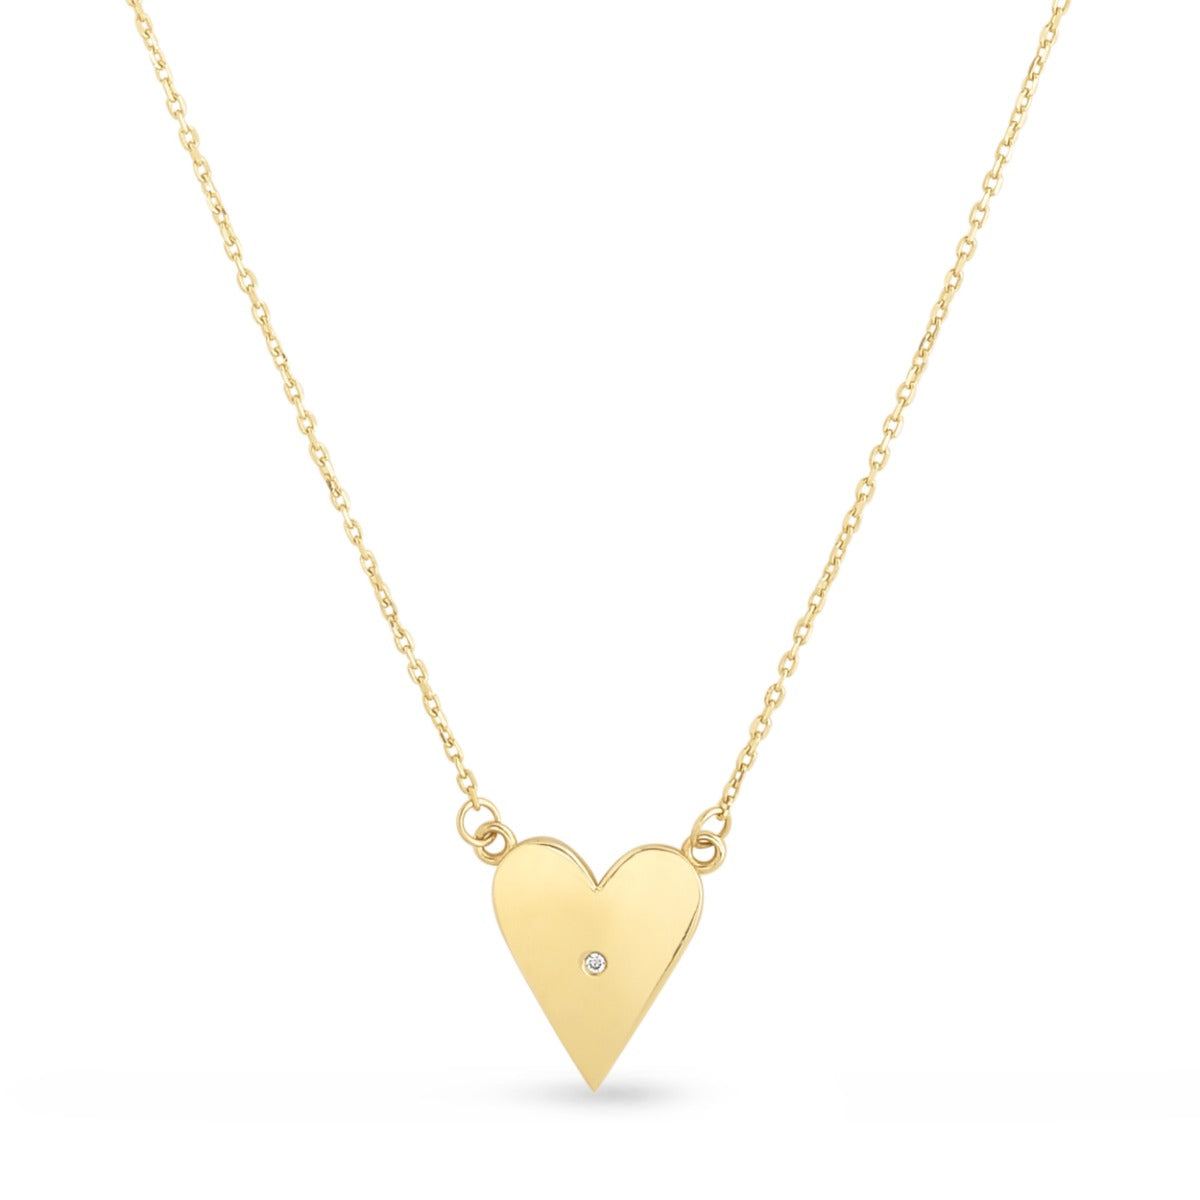 14K Gold and Diamond Polished Heart Necklace with Spring Ring Clasp